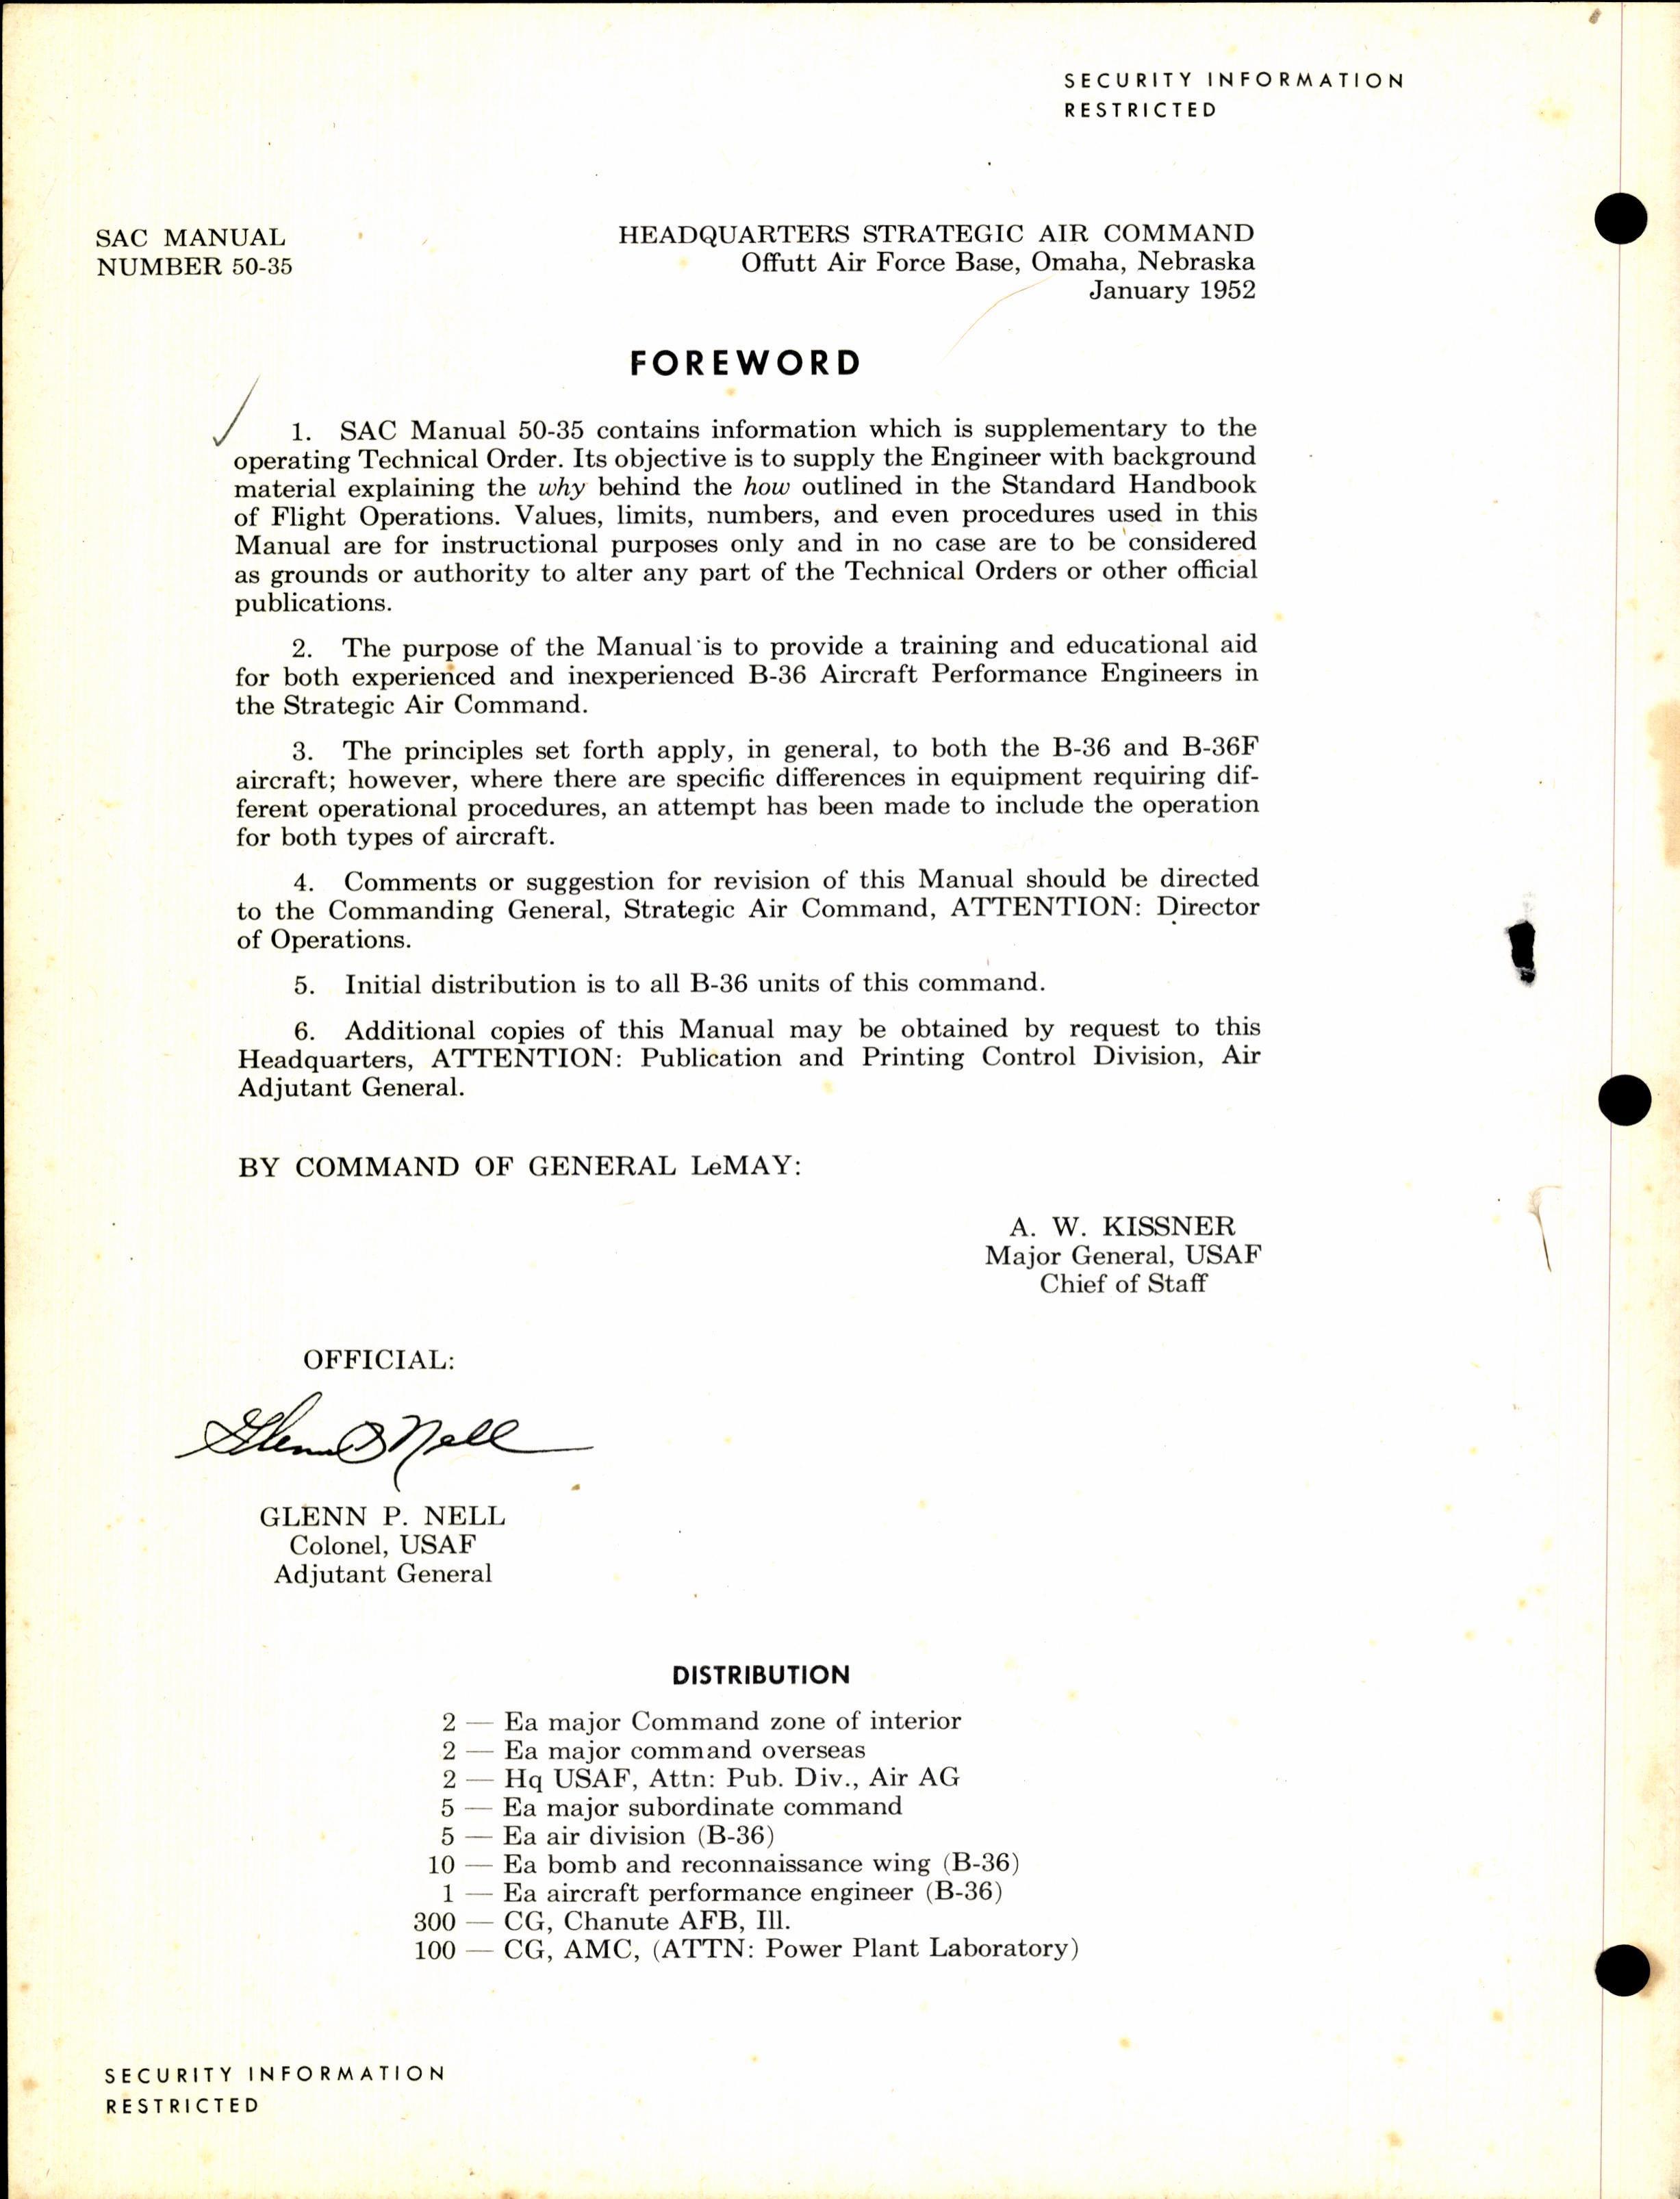 Sample page 4 from AirCorps Library document: Aircraft Performance Engineer's Manual for B-36 Aircraft Engine Operation